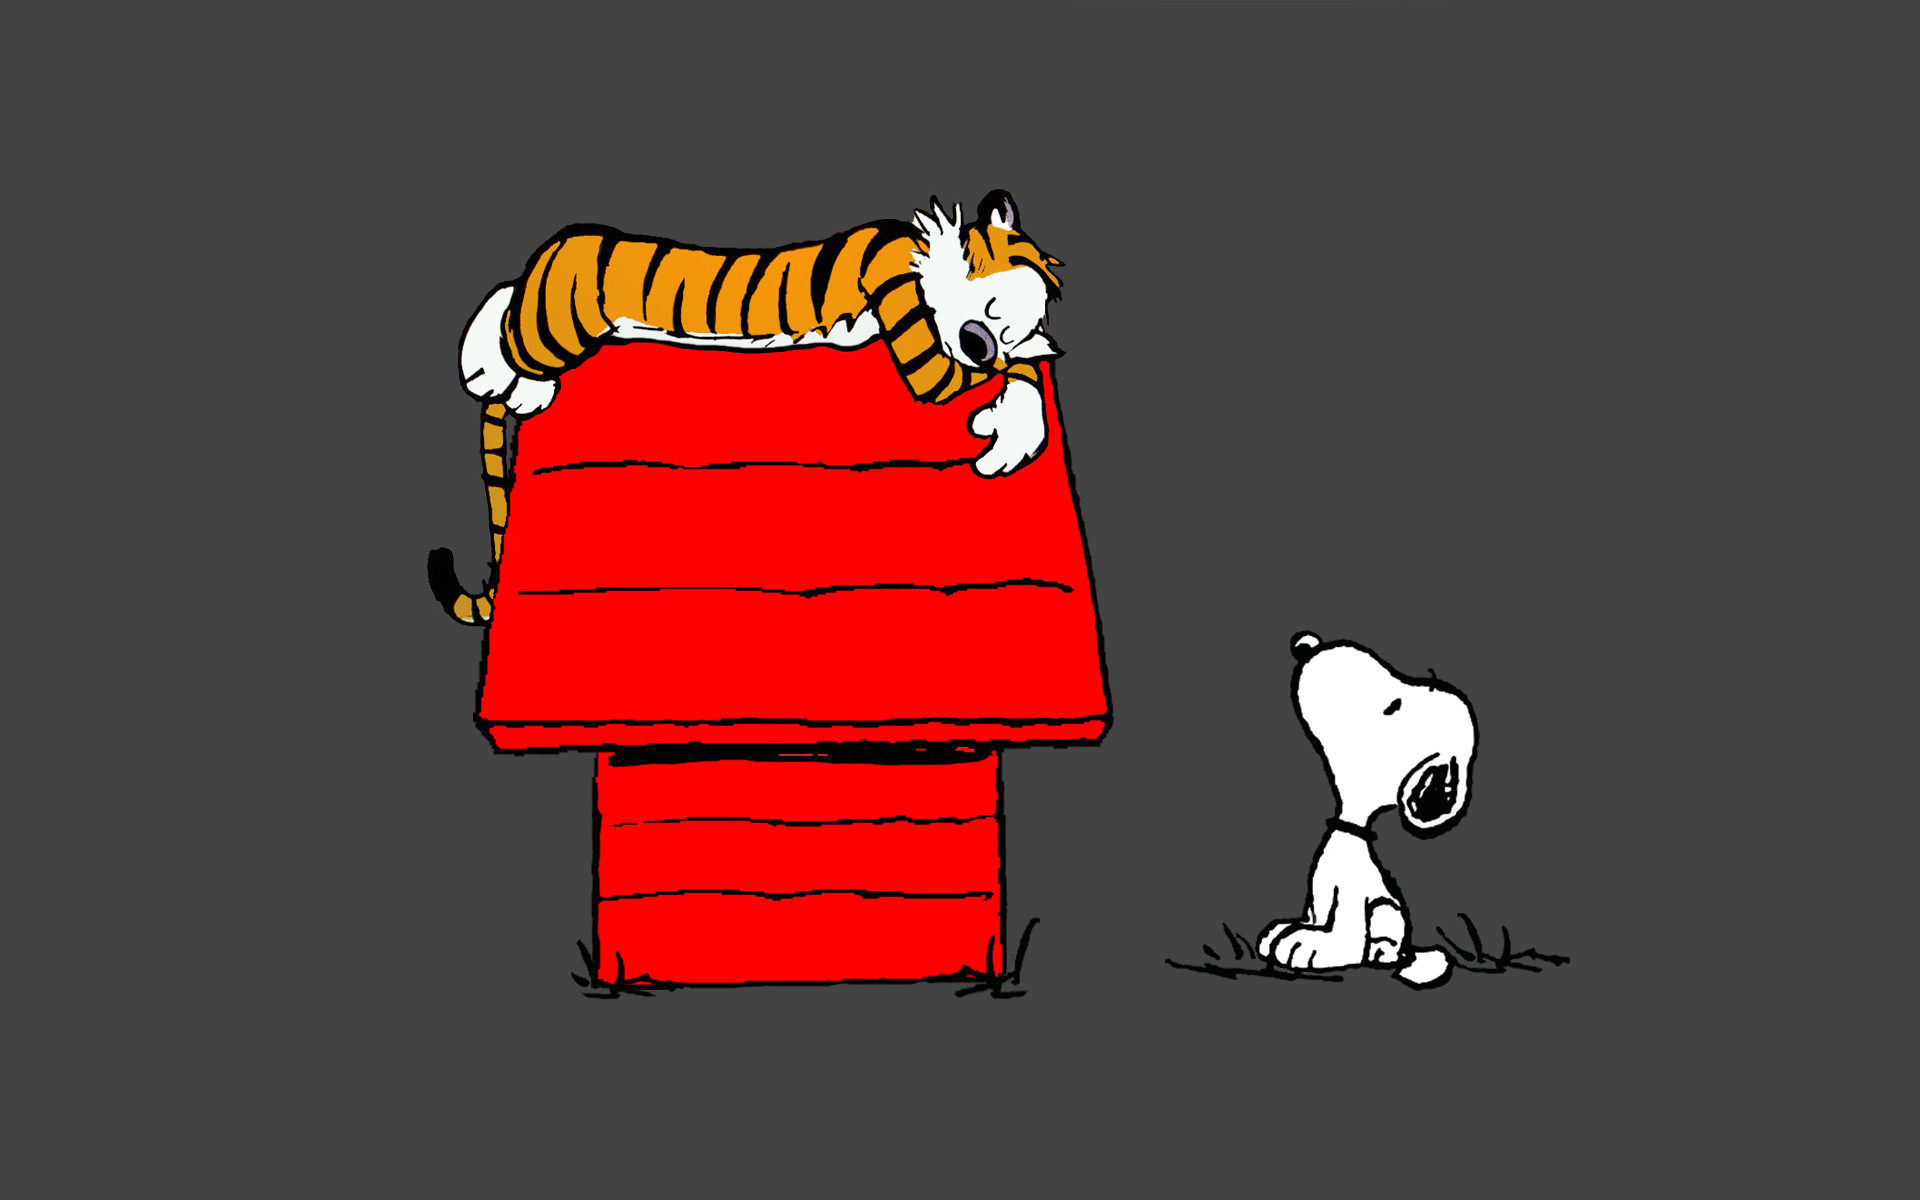 Peanuts Wallpaper For Android Peanuts Tiger Wallpaper Calvin And Hobbes Snoopy 19x10 Wallpaper Teahub Io